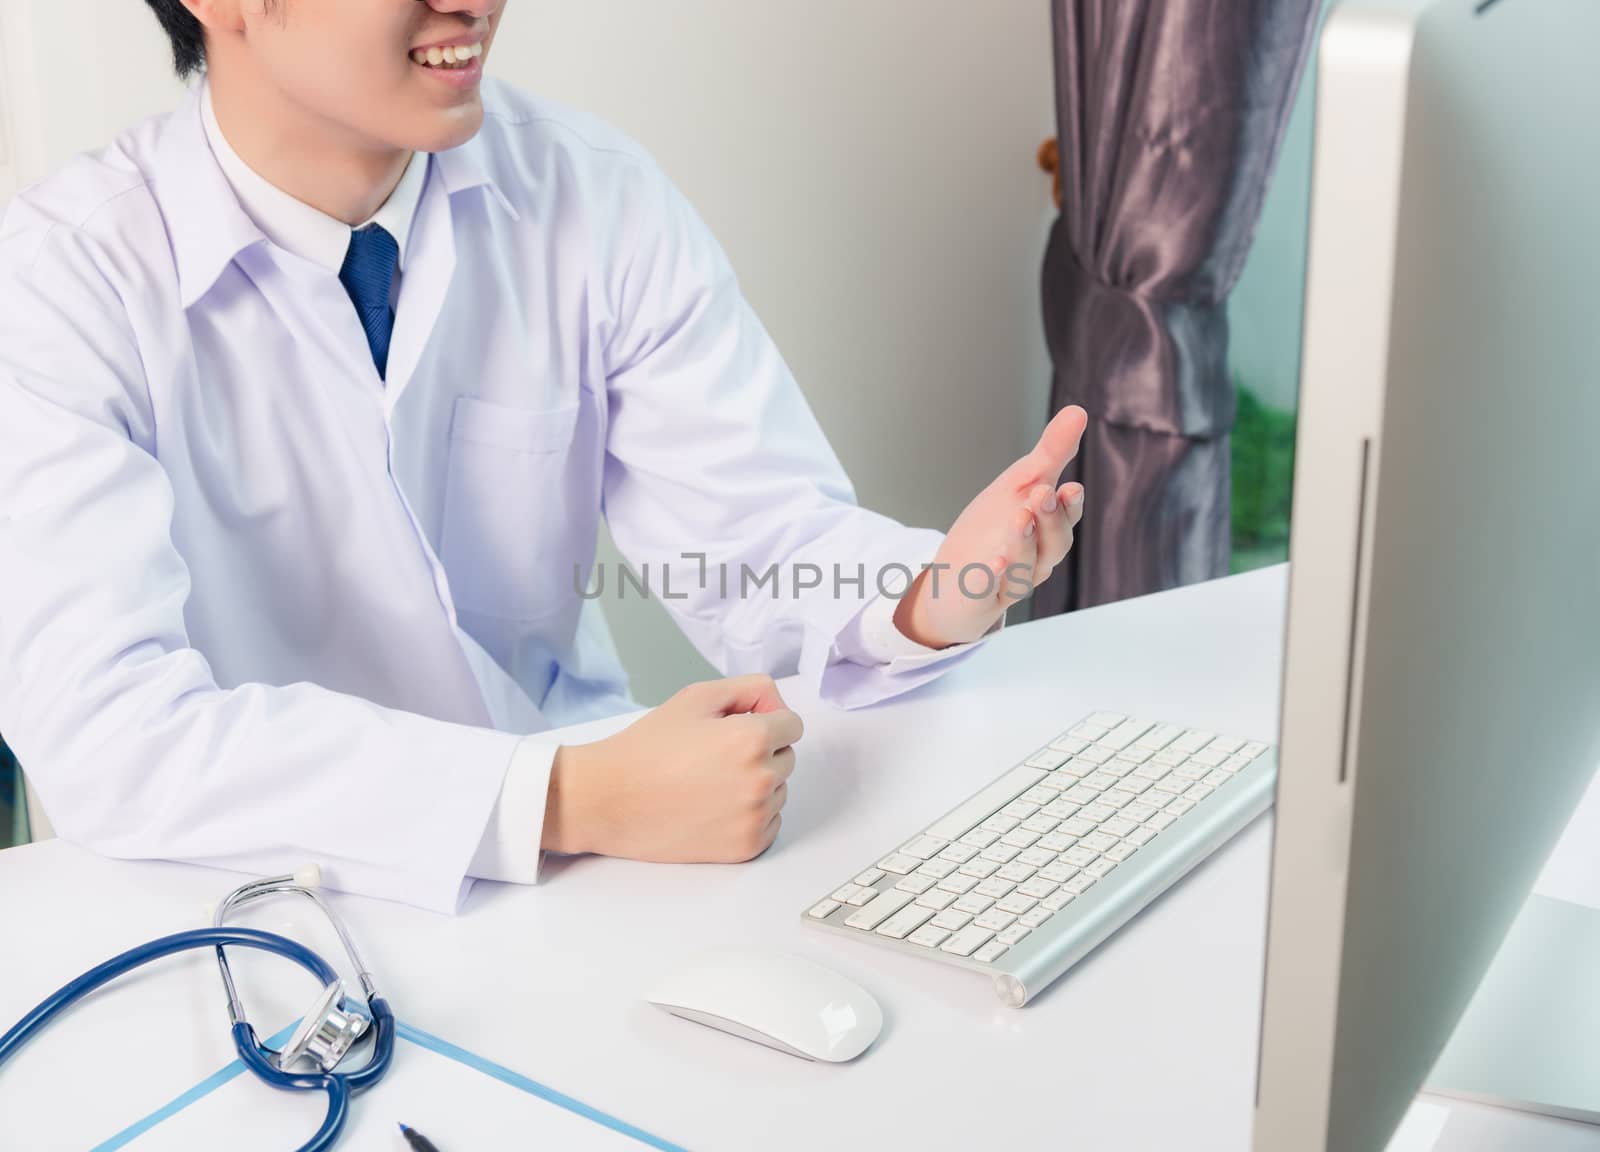 Asian young handsome doctor man wearing a doctor's dress and stethoscope video conference call or facetime raise hand to explain the symptoms he smiling at hospital office, Health medical care concept